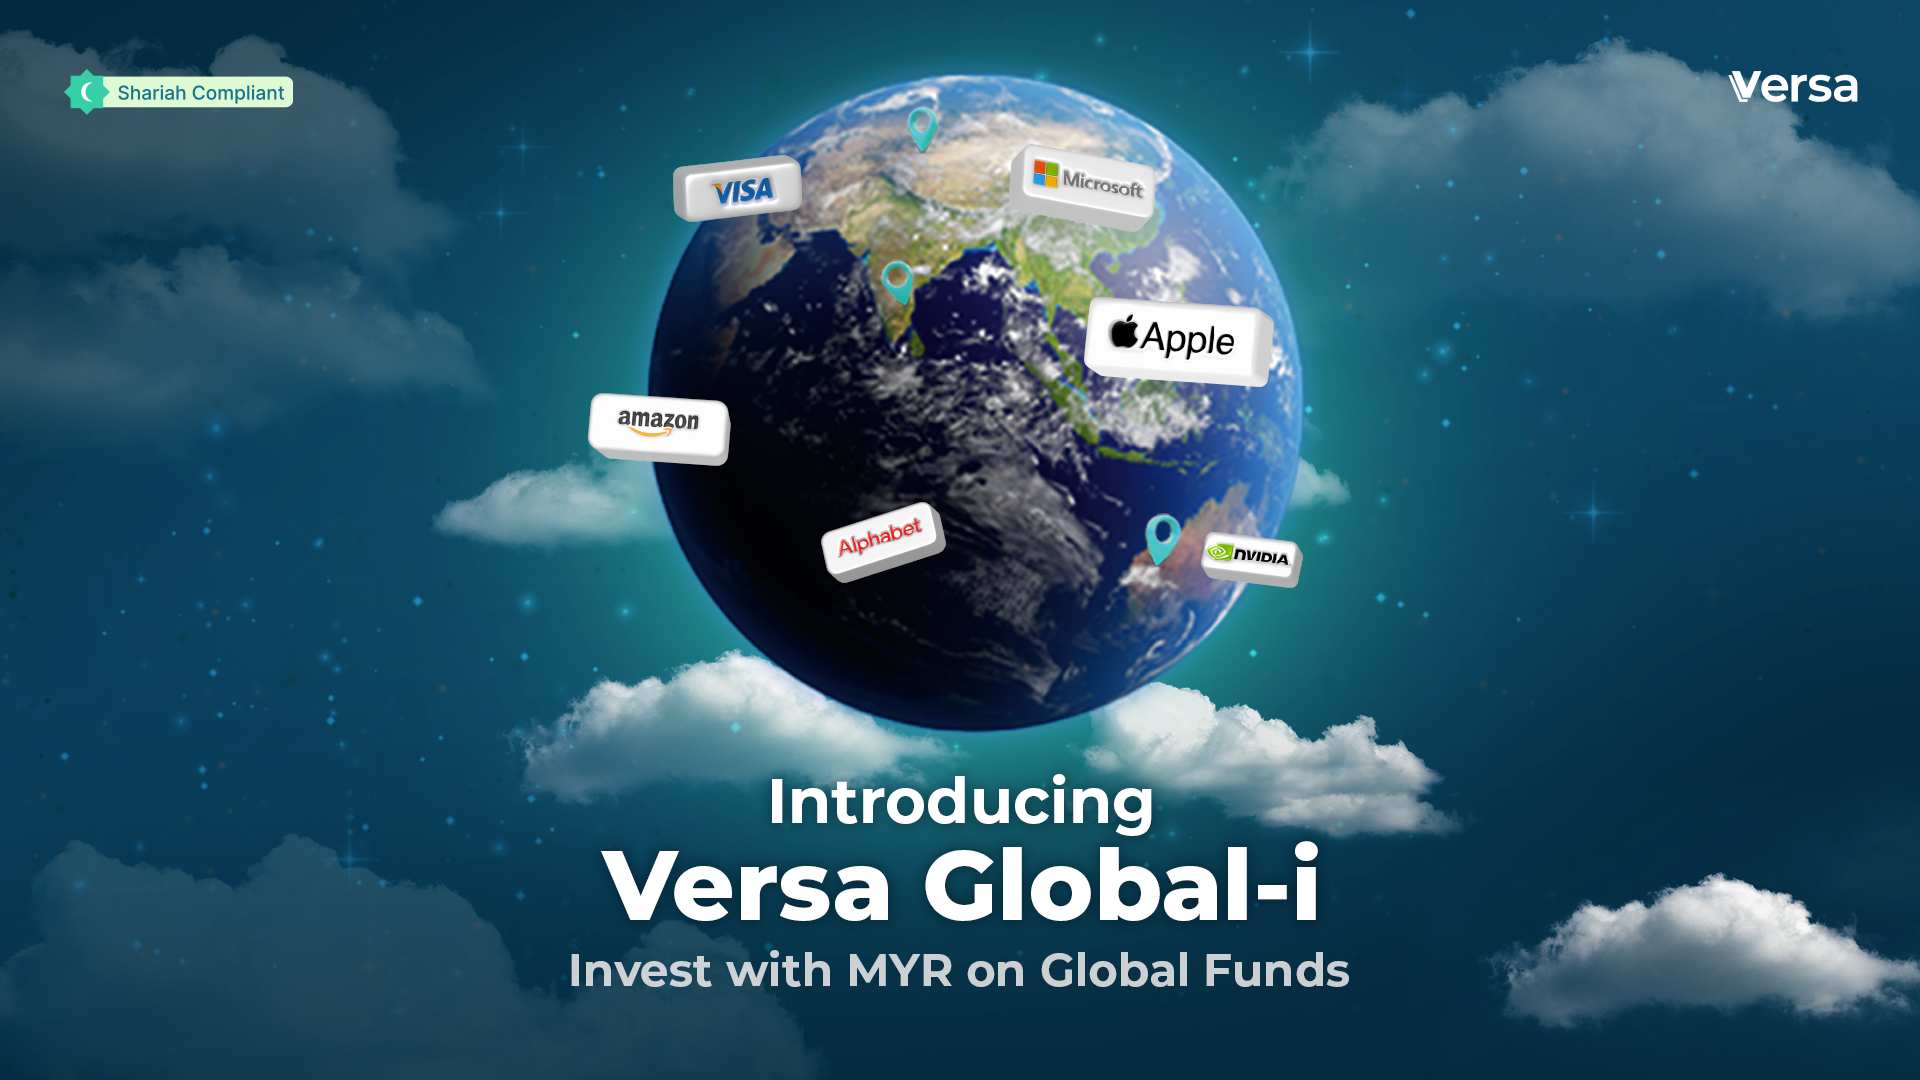 Introducing Versa Global-i! Invest with Malaysian Ringgit (MYR) on Global Funds. 